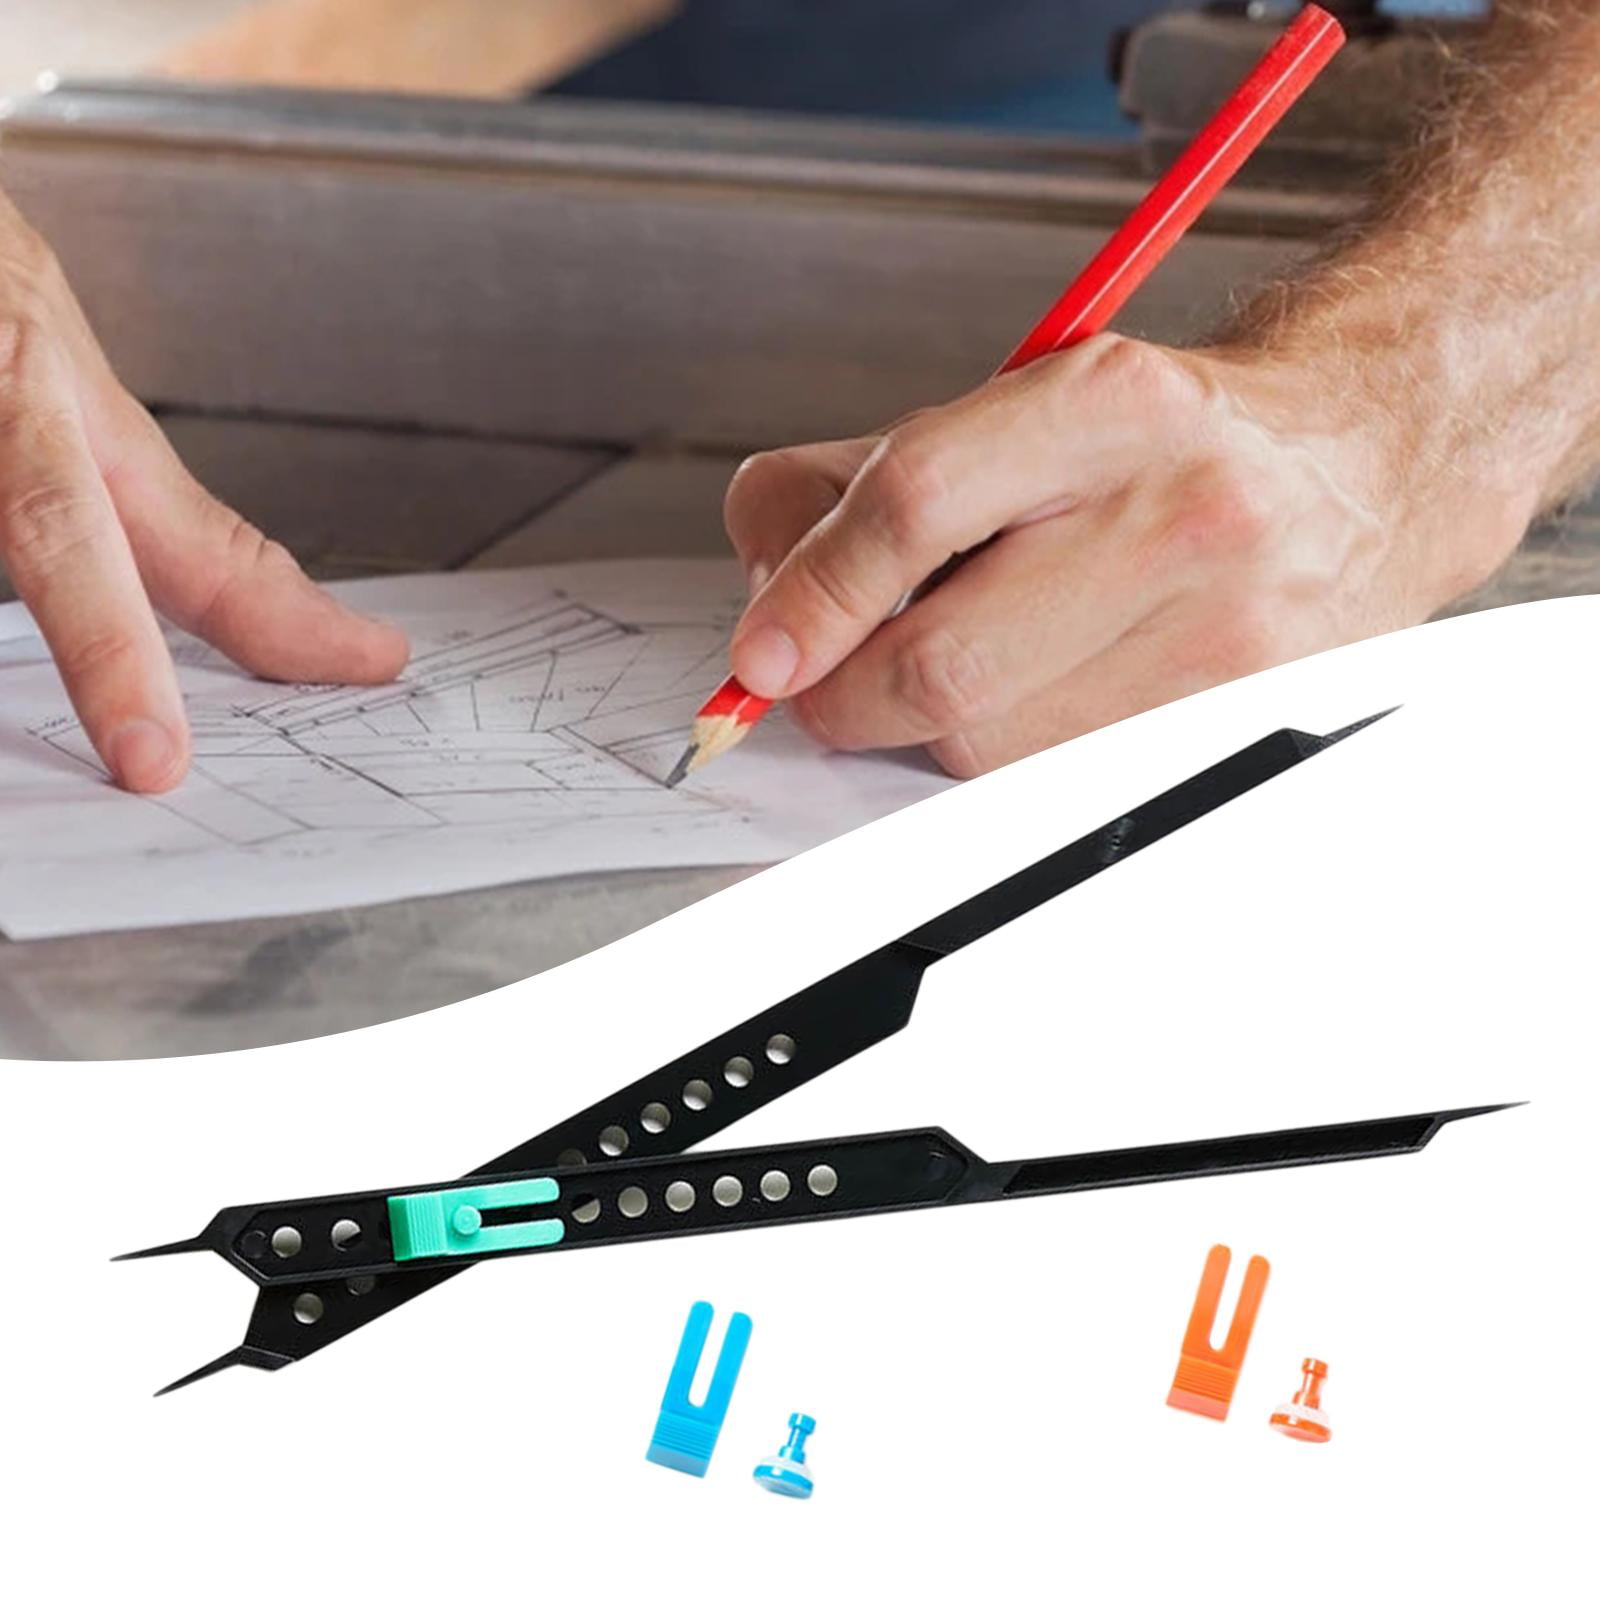 Pantograph Drawing Tool Useful In Art Architecture And Engineering Field